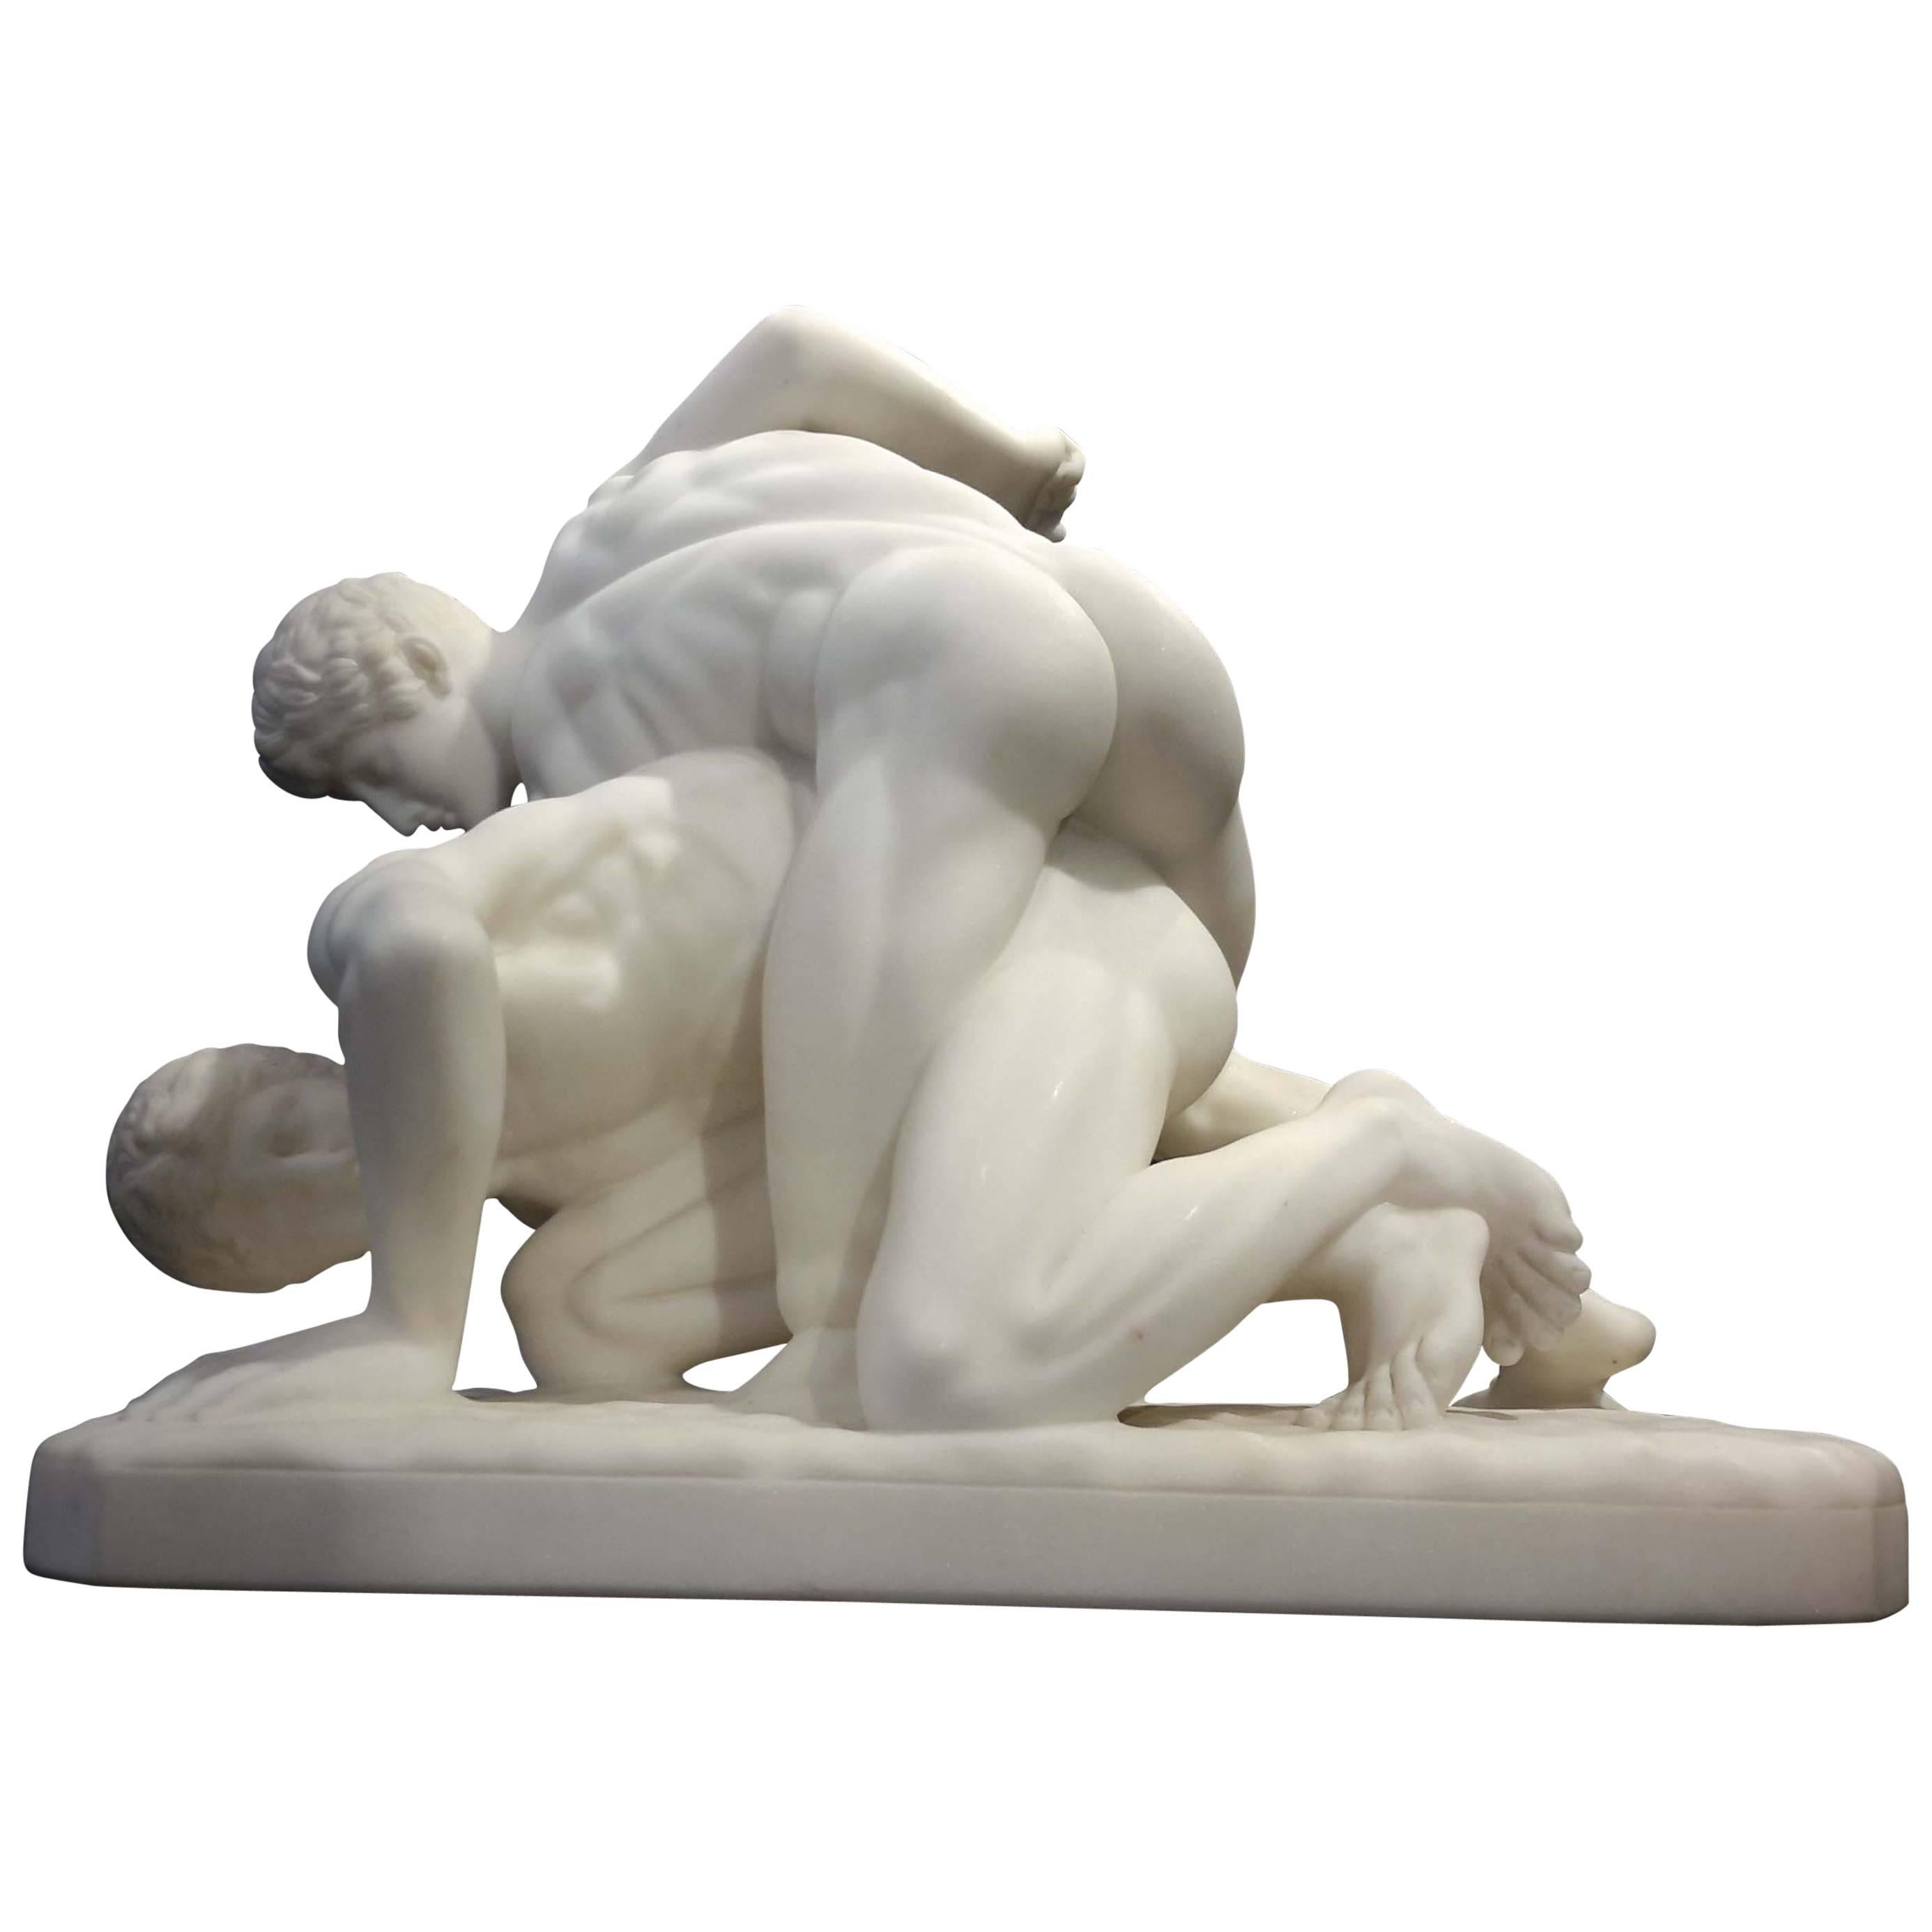 Carrera Marble Sculpture of Two Roman Wrestlers, 19th Century Grand Tour